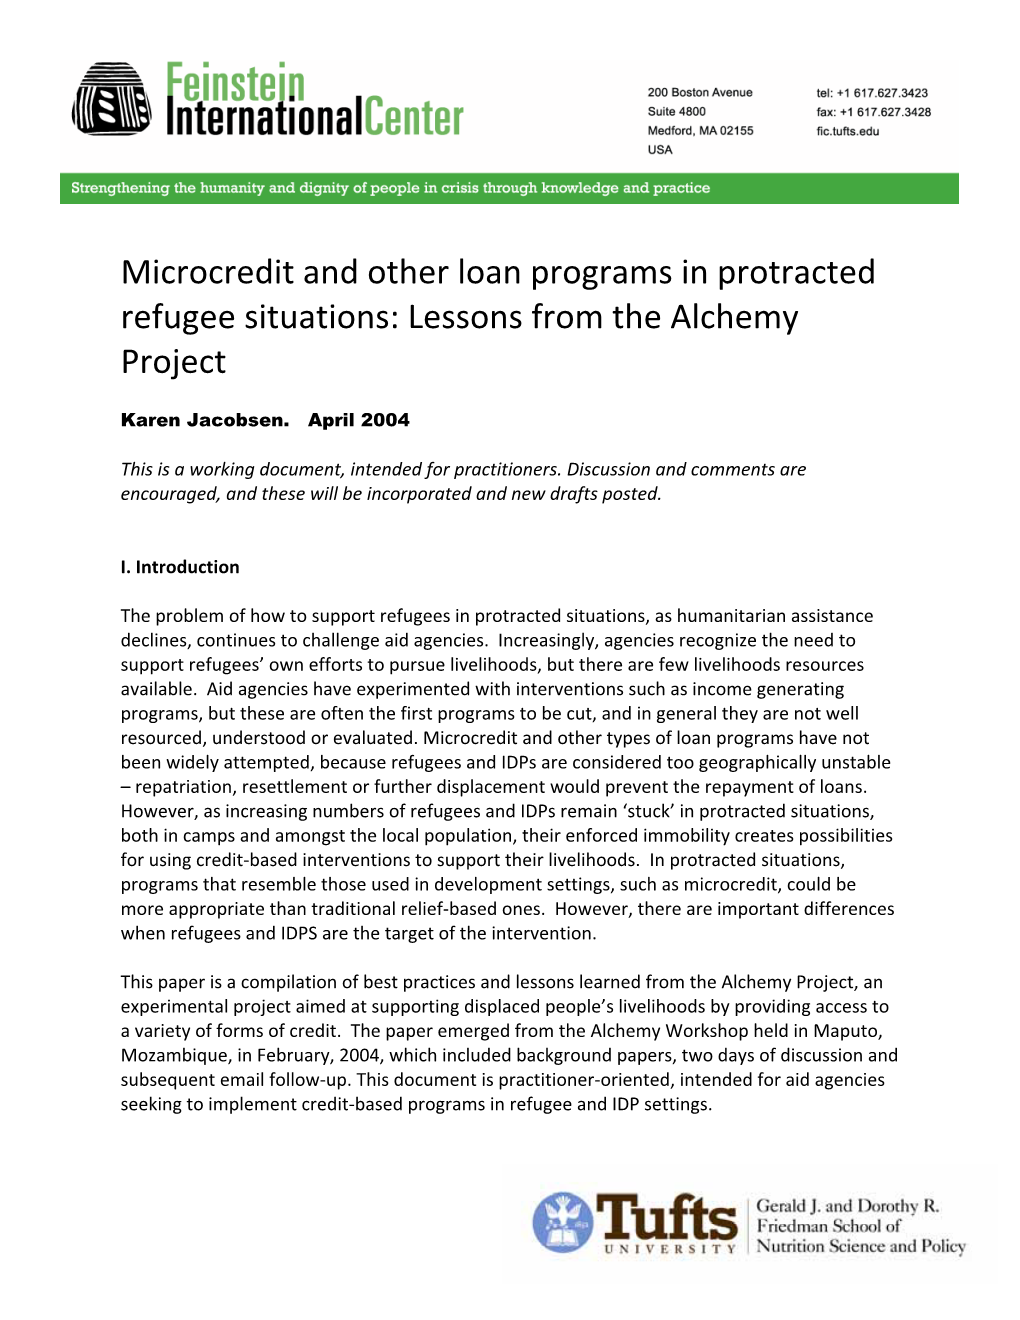 Microcredit and Other Loan Programs in Protracted Refugee Situations: Lessons from the Alchemy Project